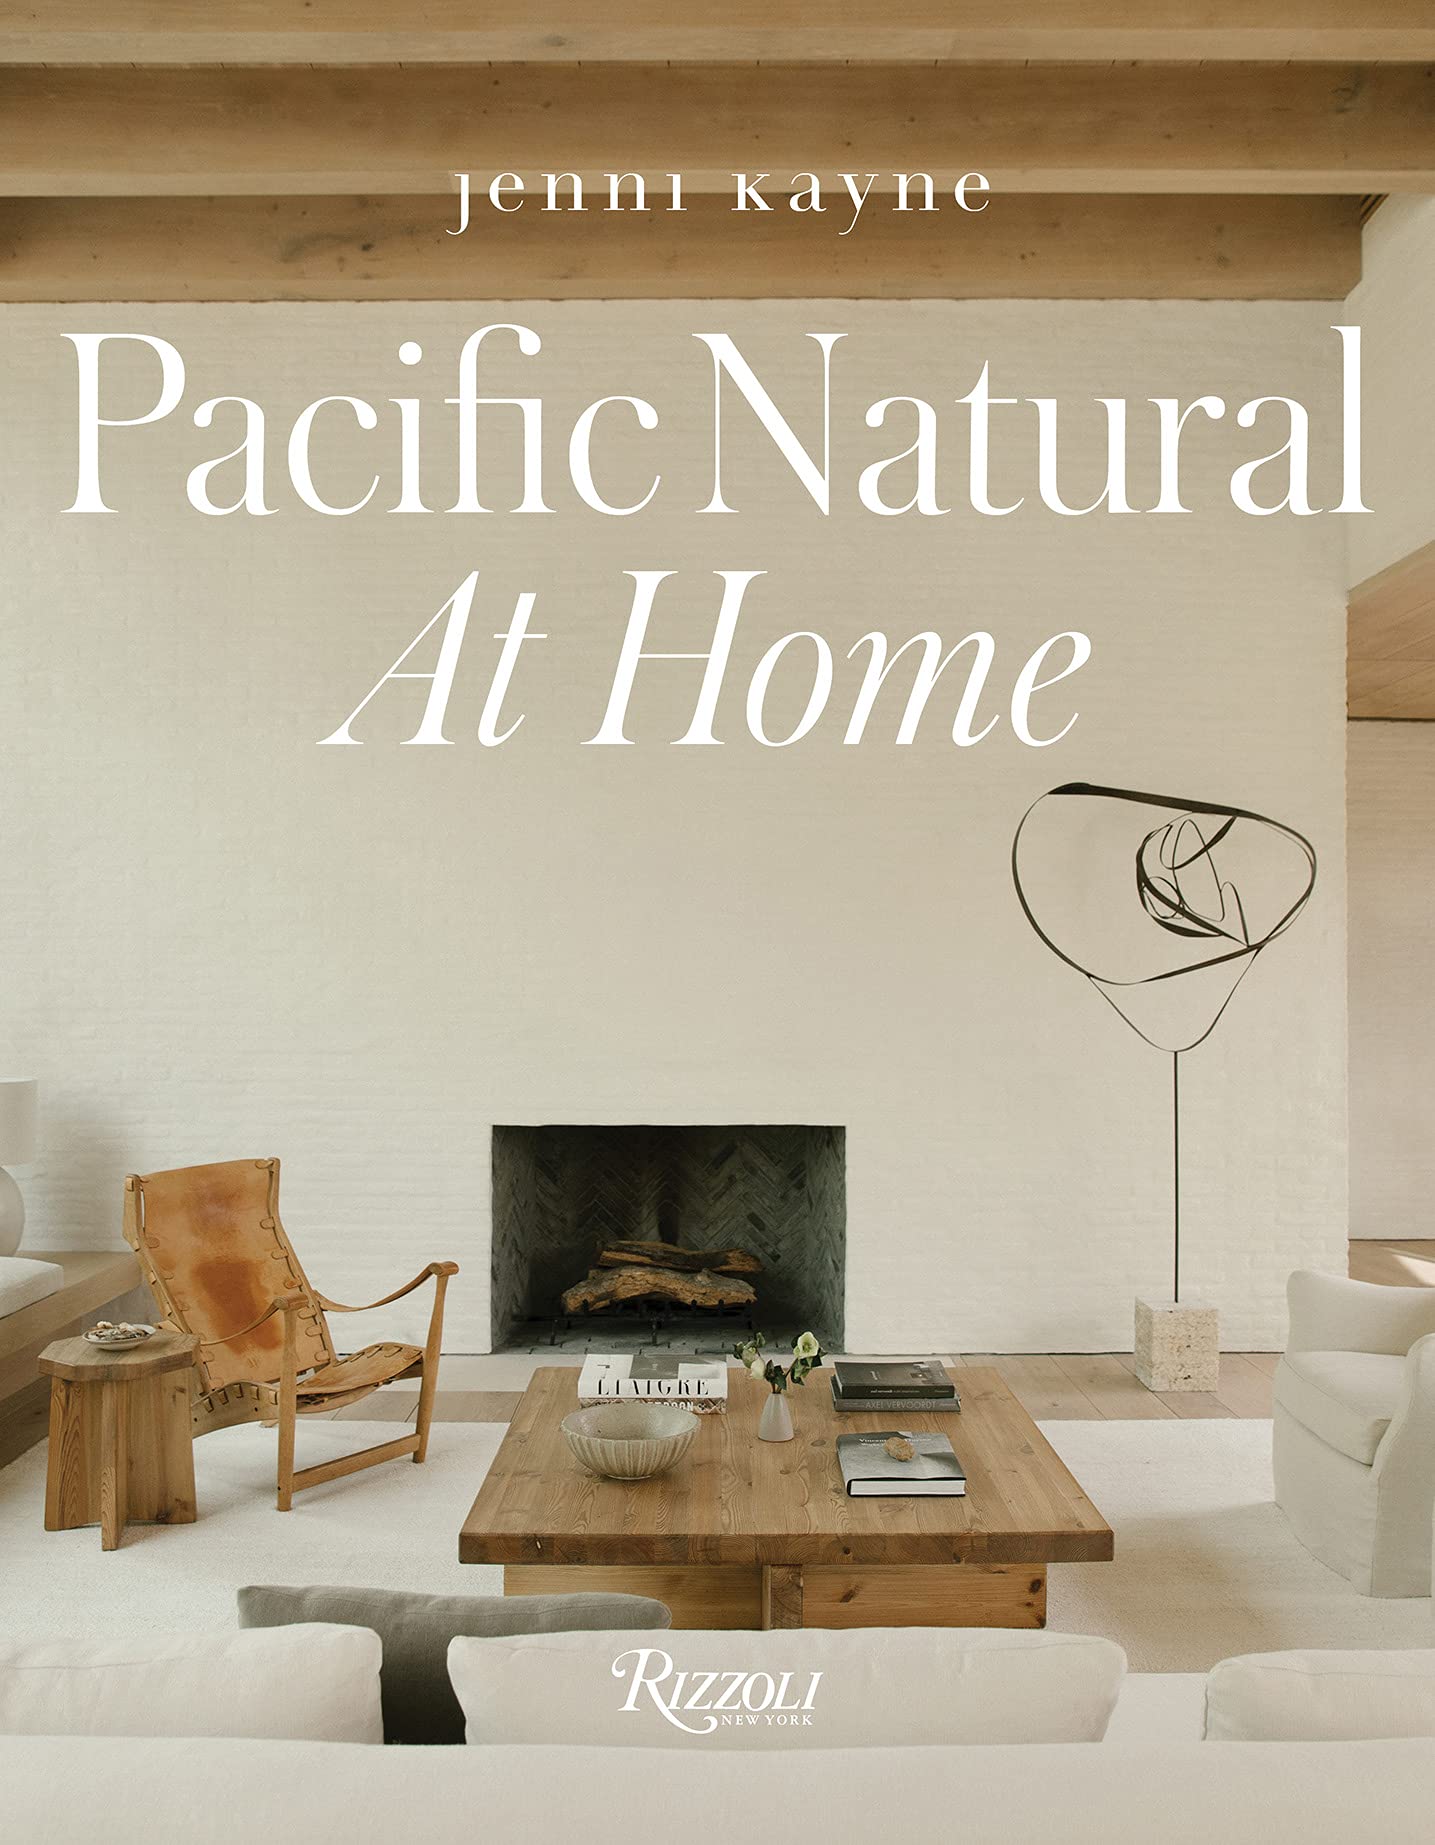 Best interior design books – 8 of our favorite must-reads for 2022